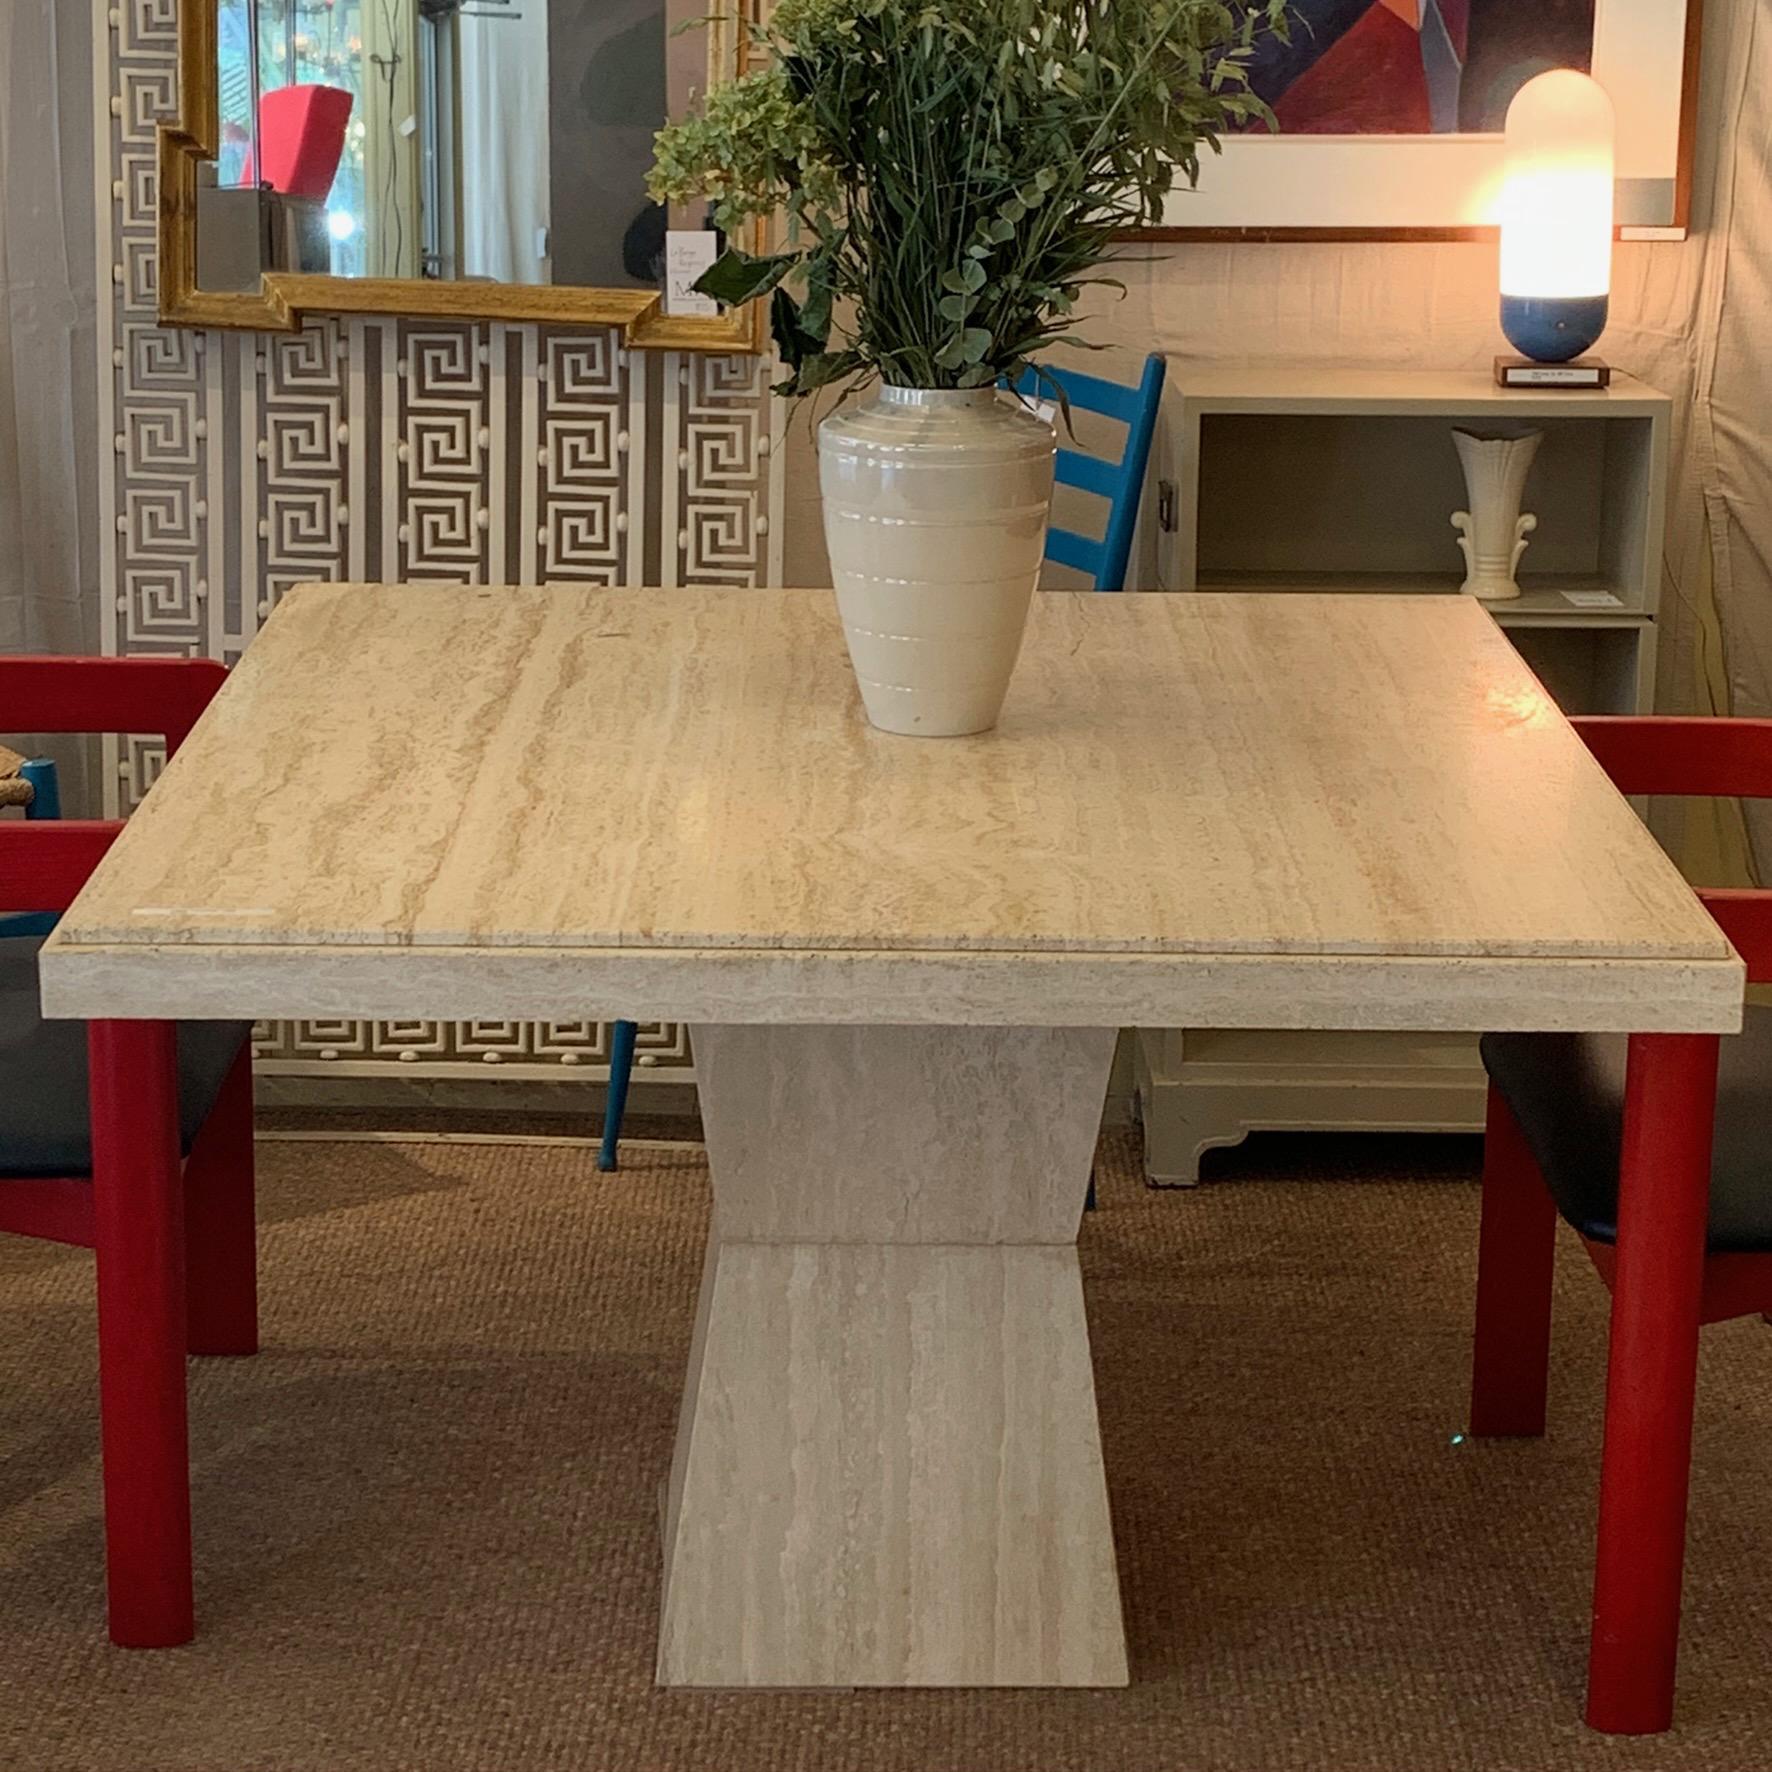 Really great square travertine pedestal table that is versatile for smaller dining or center table. Sold through modern furniture retailer Maurice Villencey in the 1970s.